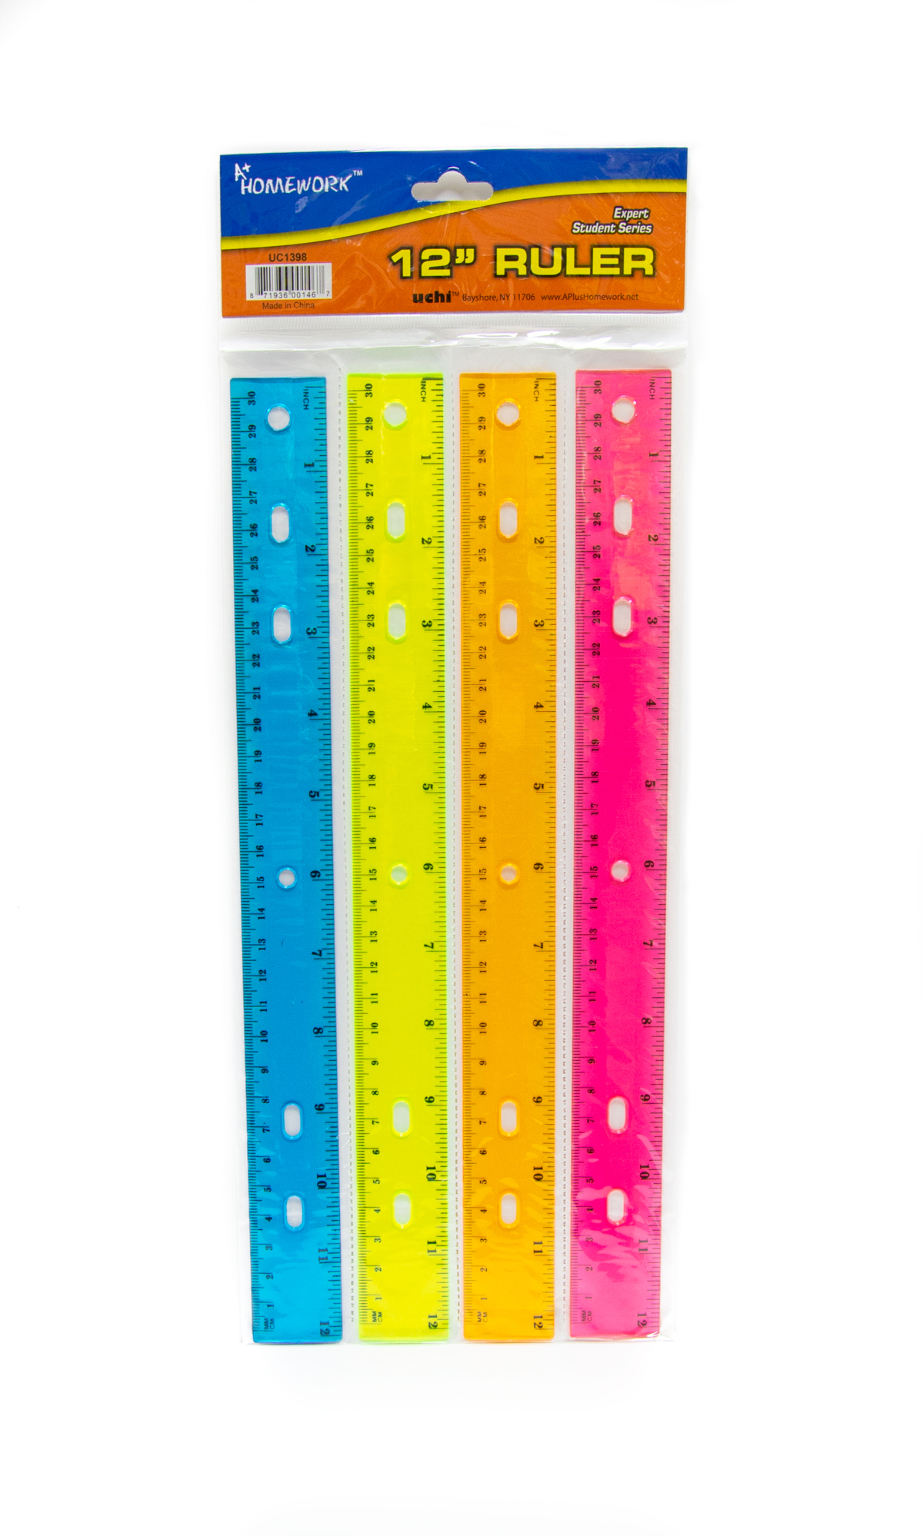 Supplies 4 Plastic Rulers, Bulk Shatterproof 12 inch Ruler for School, Home, or Office, Clear Plastic Rulers, 4Assorted Colors